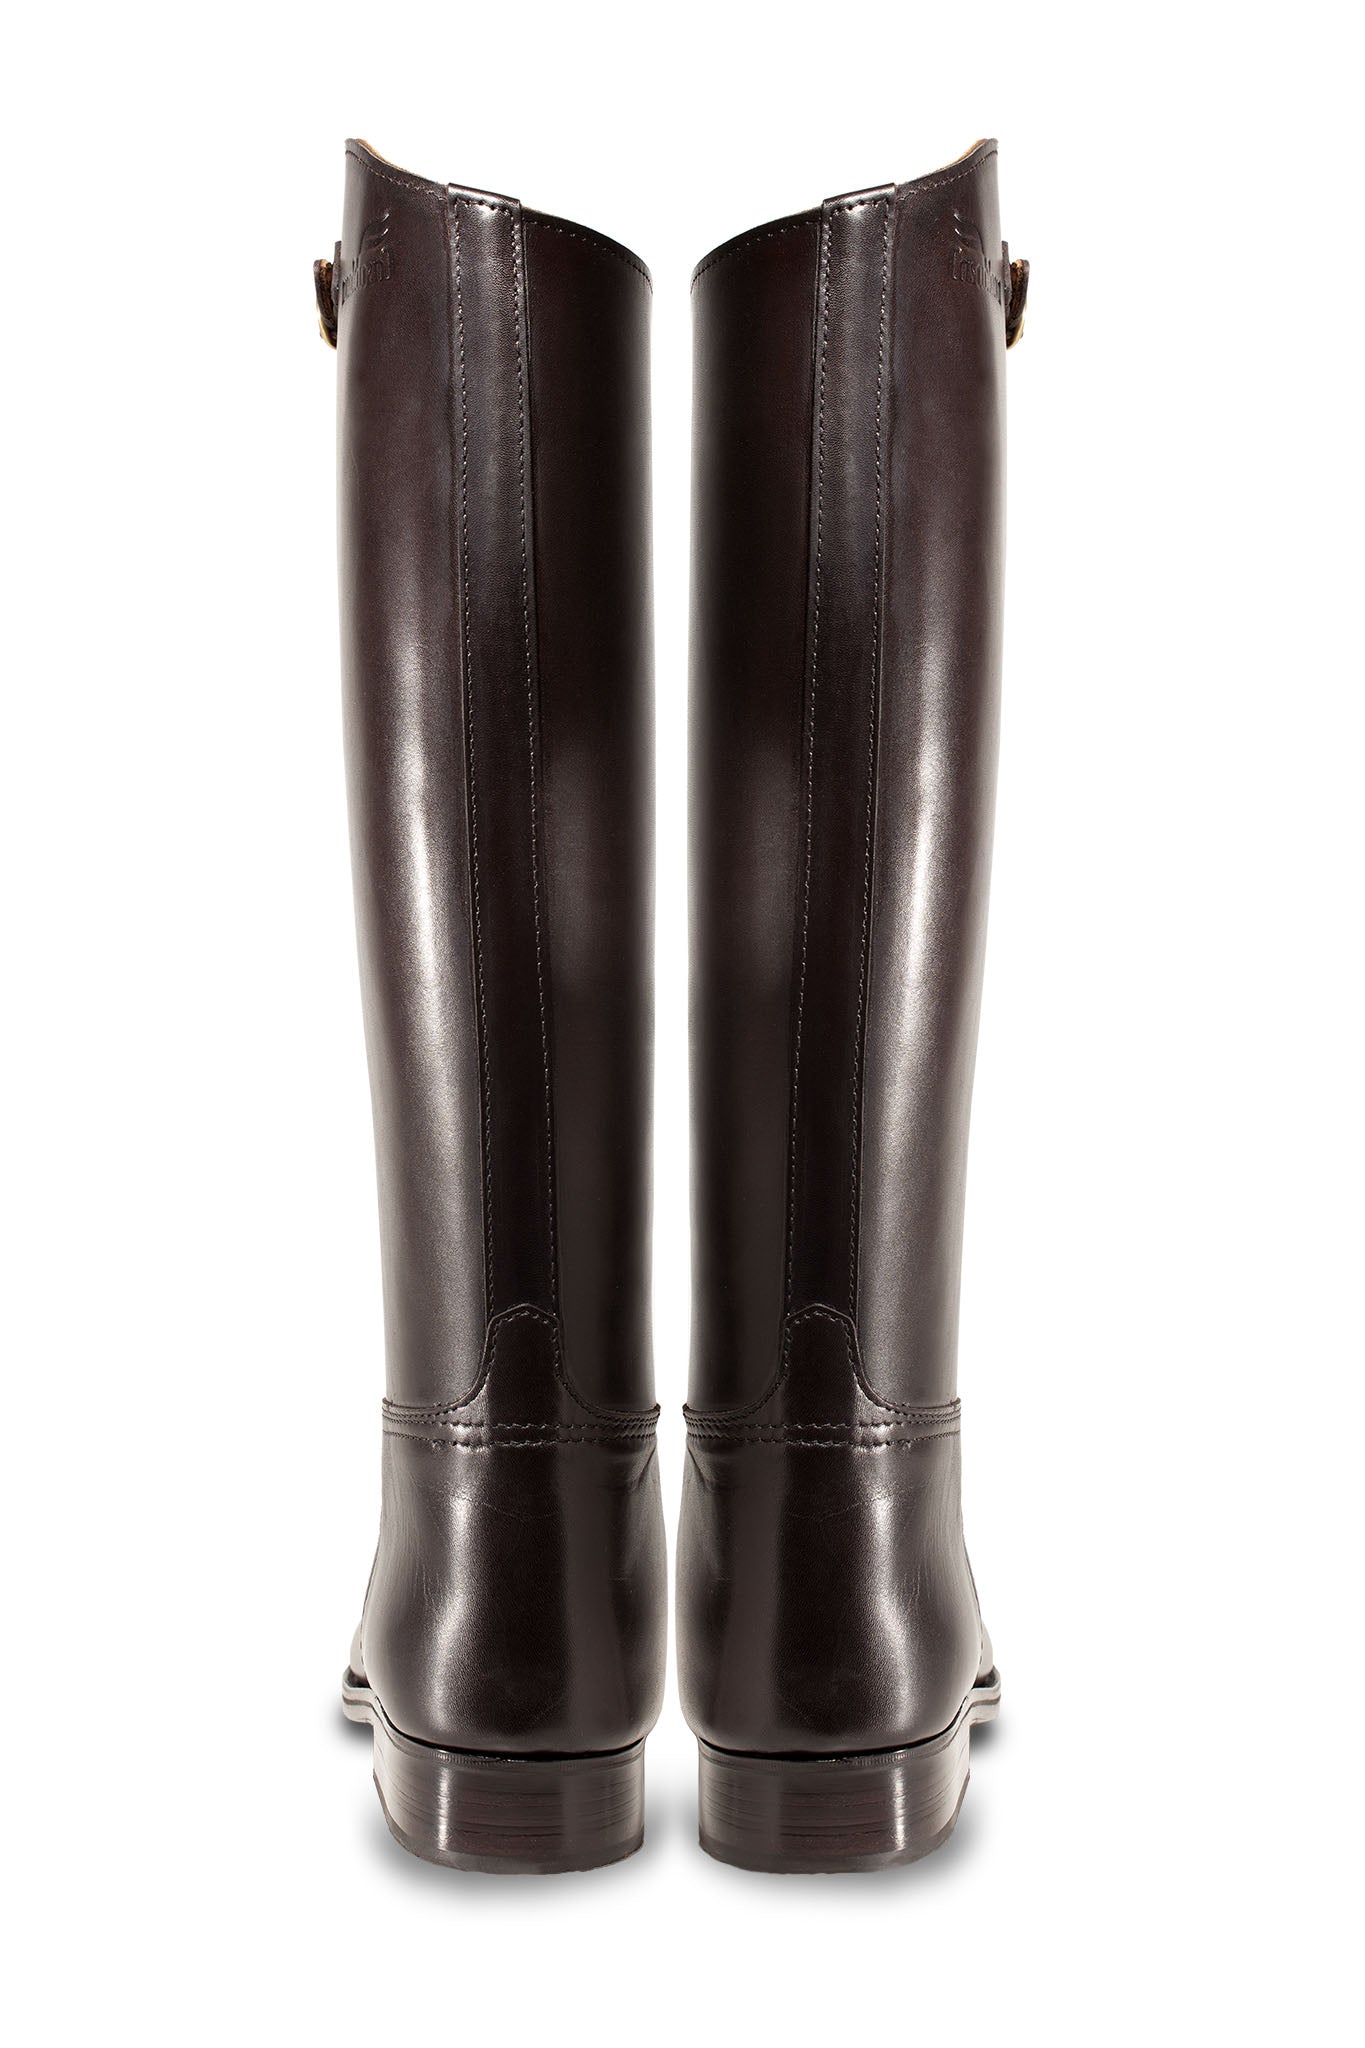 Pro Zipper Front Polo Boots (DARK BROWN)